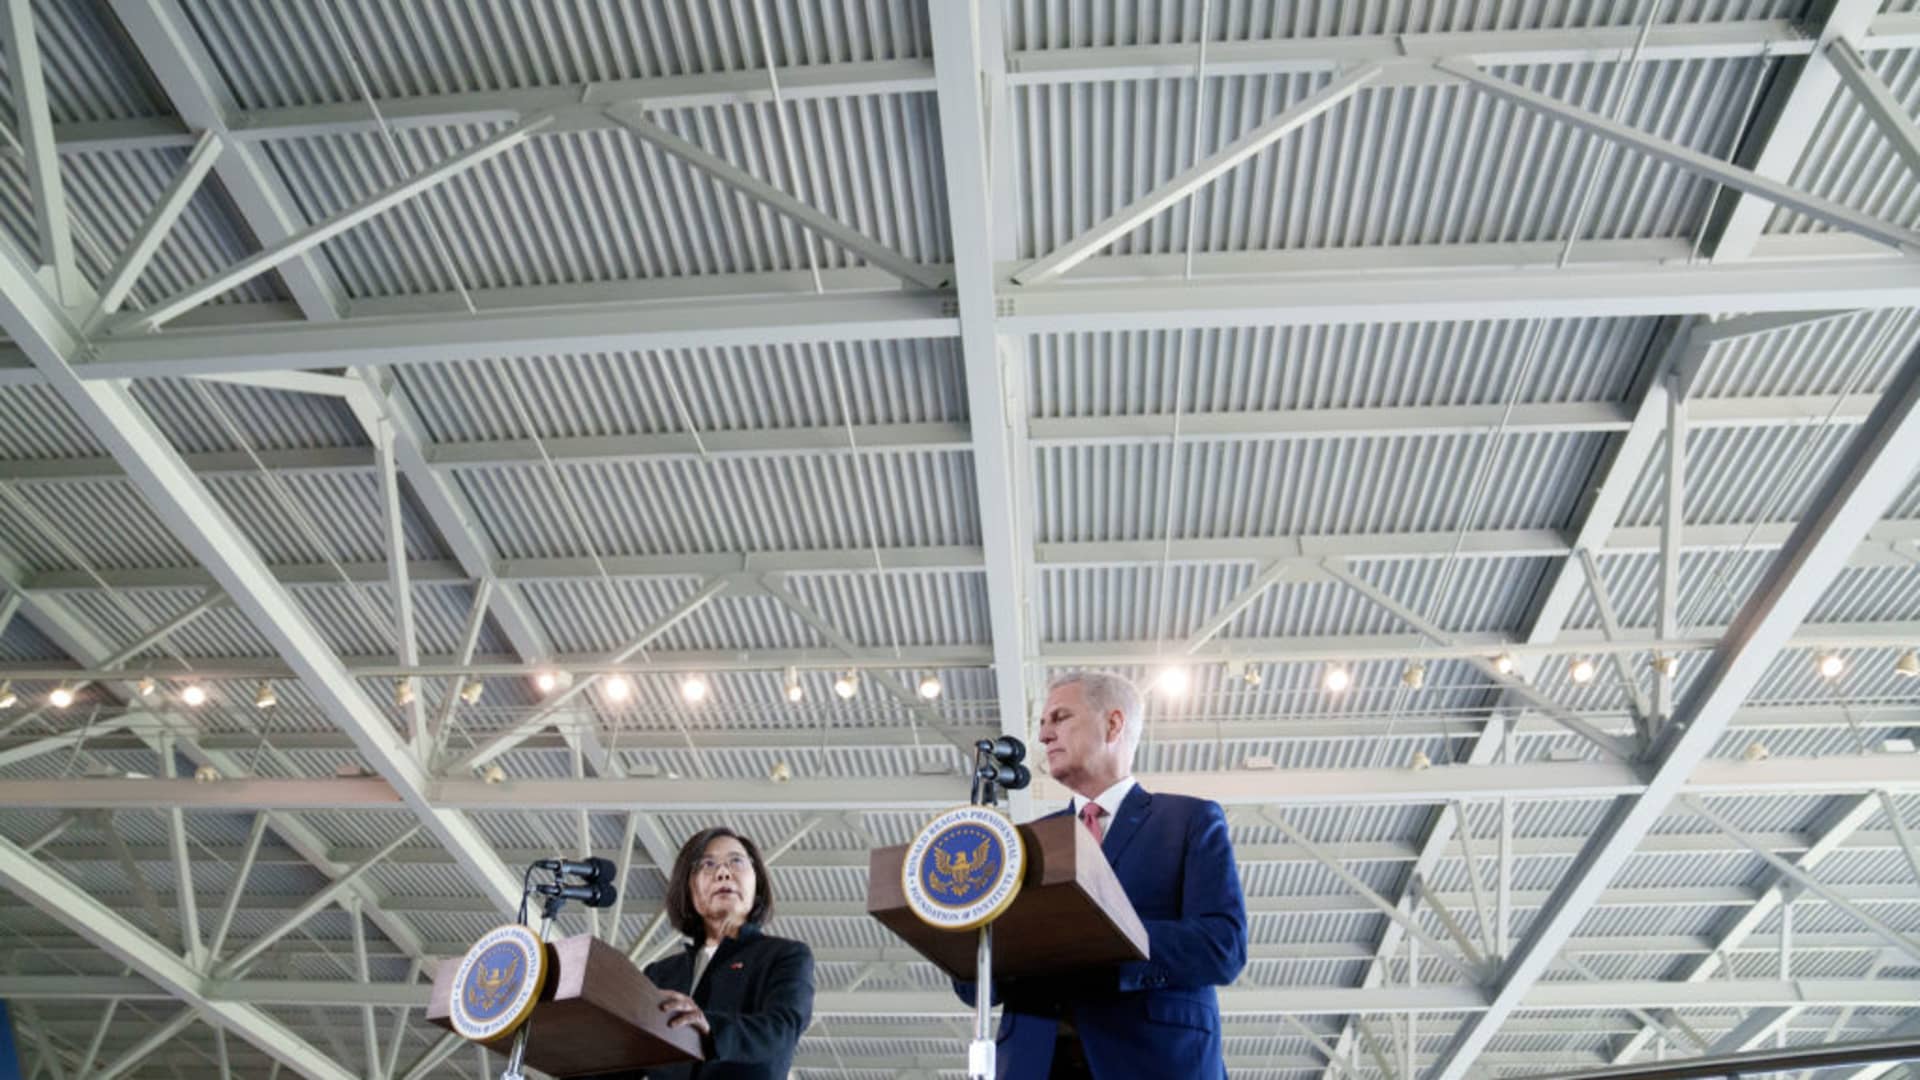 Tsai Ing-wen, Taiwan's president, left, and US House Speaker Kevin McCarthy, a Republican from California, during an event at the Ronald Reagan Presidential Library in Simi Valley, California, US, on Wednesday, April 5, 2023.